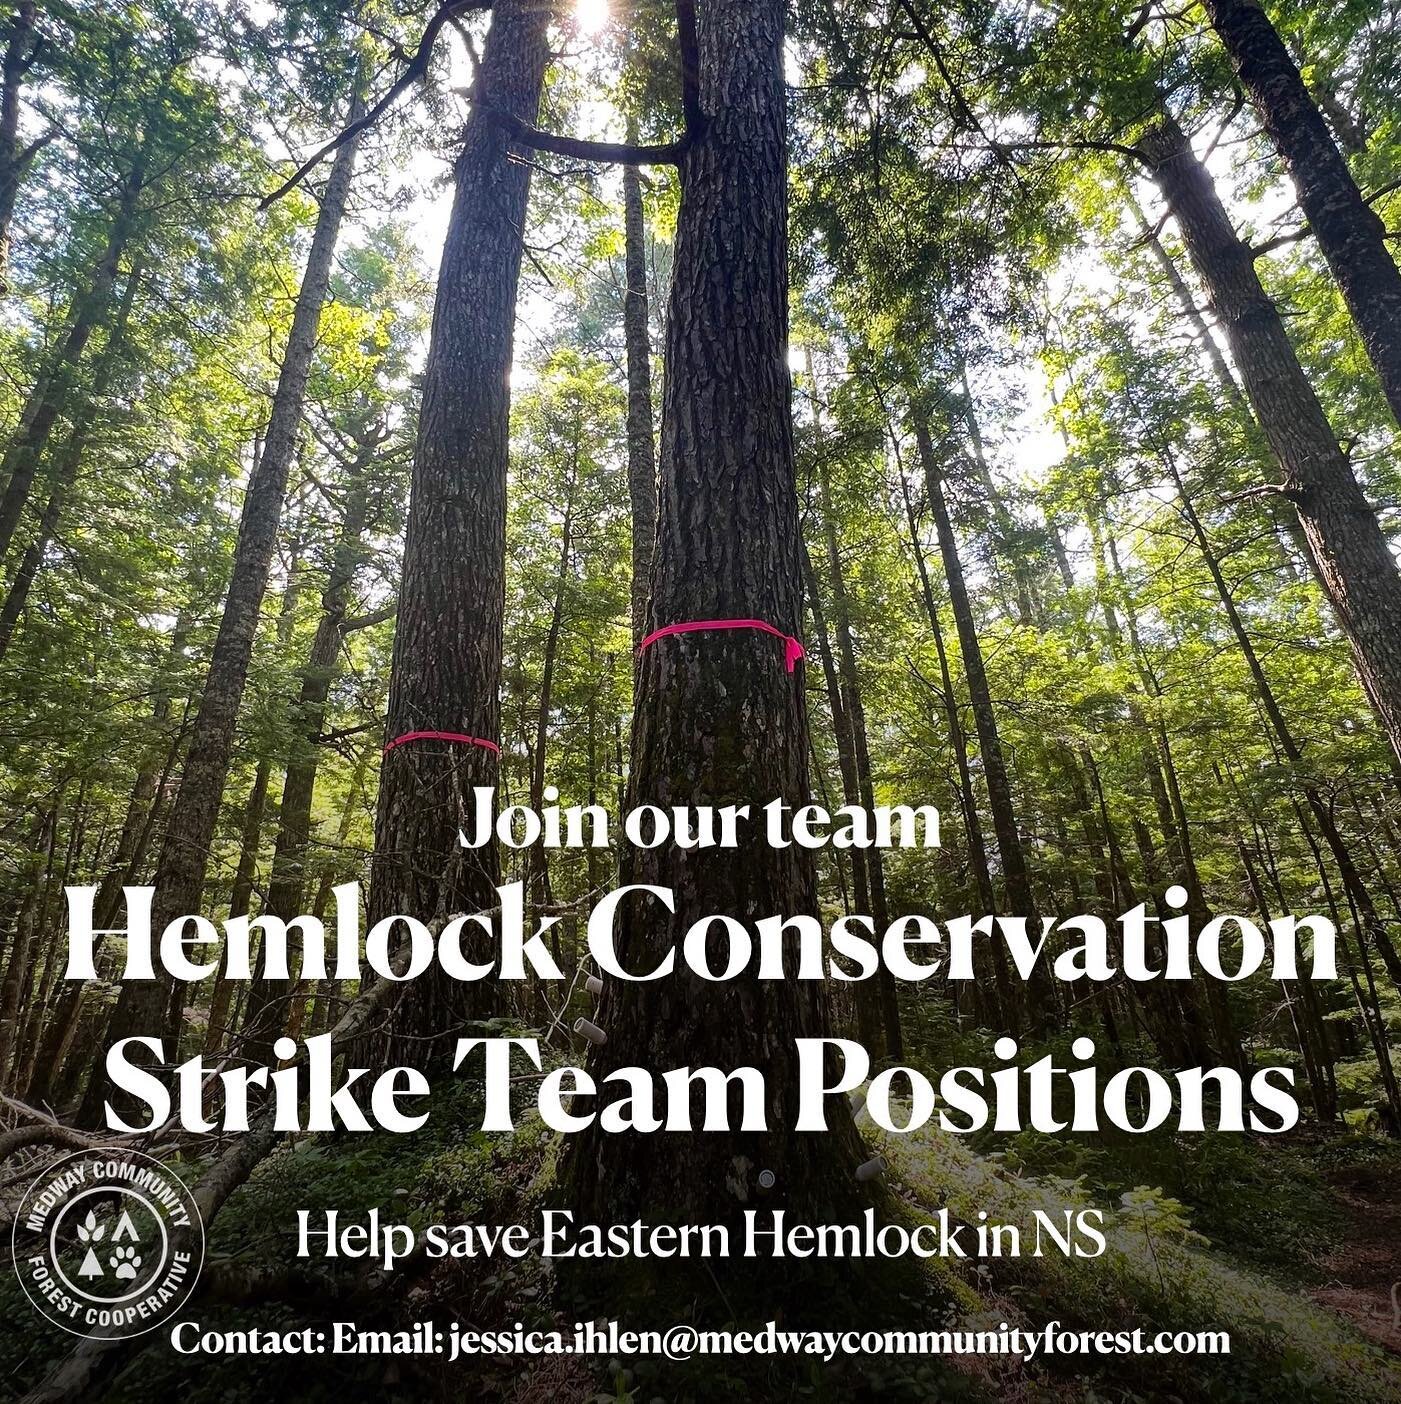 Join Our Team! Hemlock Conservation Nova Scotia is hiring Strike Team members. Help us in saving Eastern Hemlocks in Nova Scotia from the invasive insect Hemlock Woolly Adelgid (HWA)🌲 🌎 

For more information check the Jobs link in our bio! 
#green